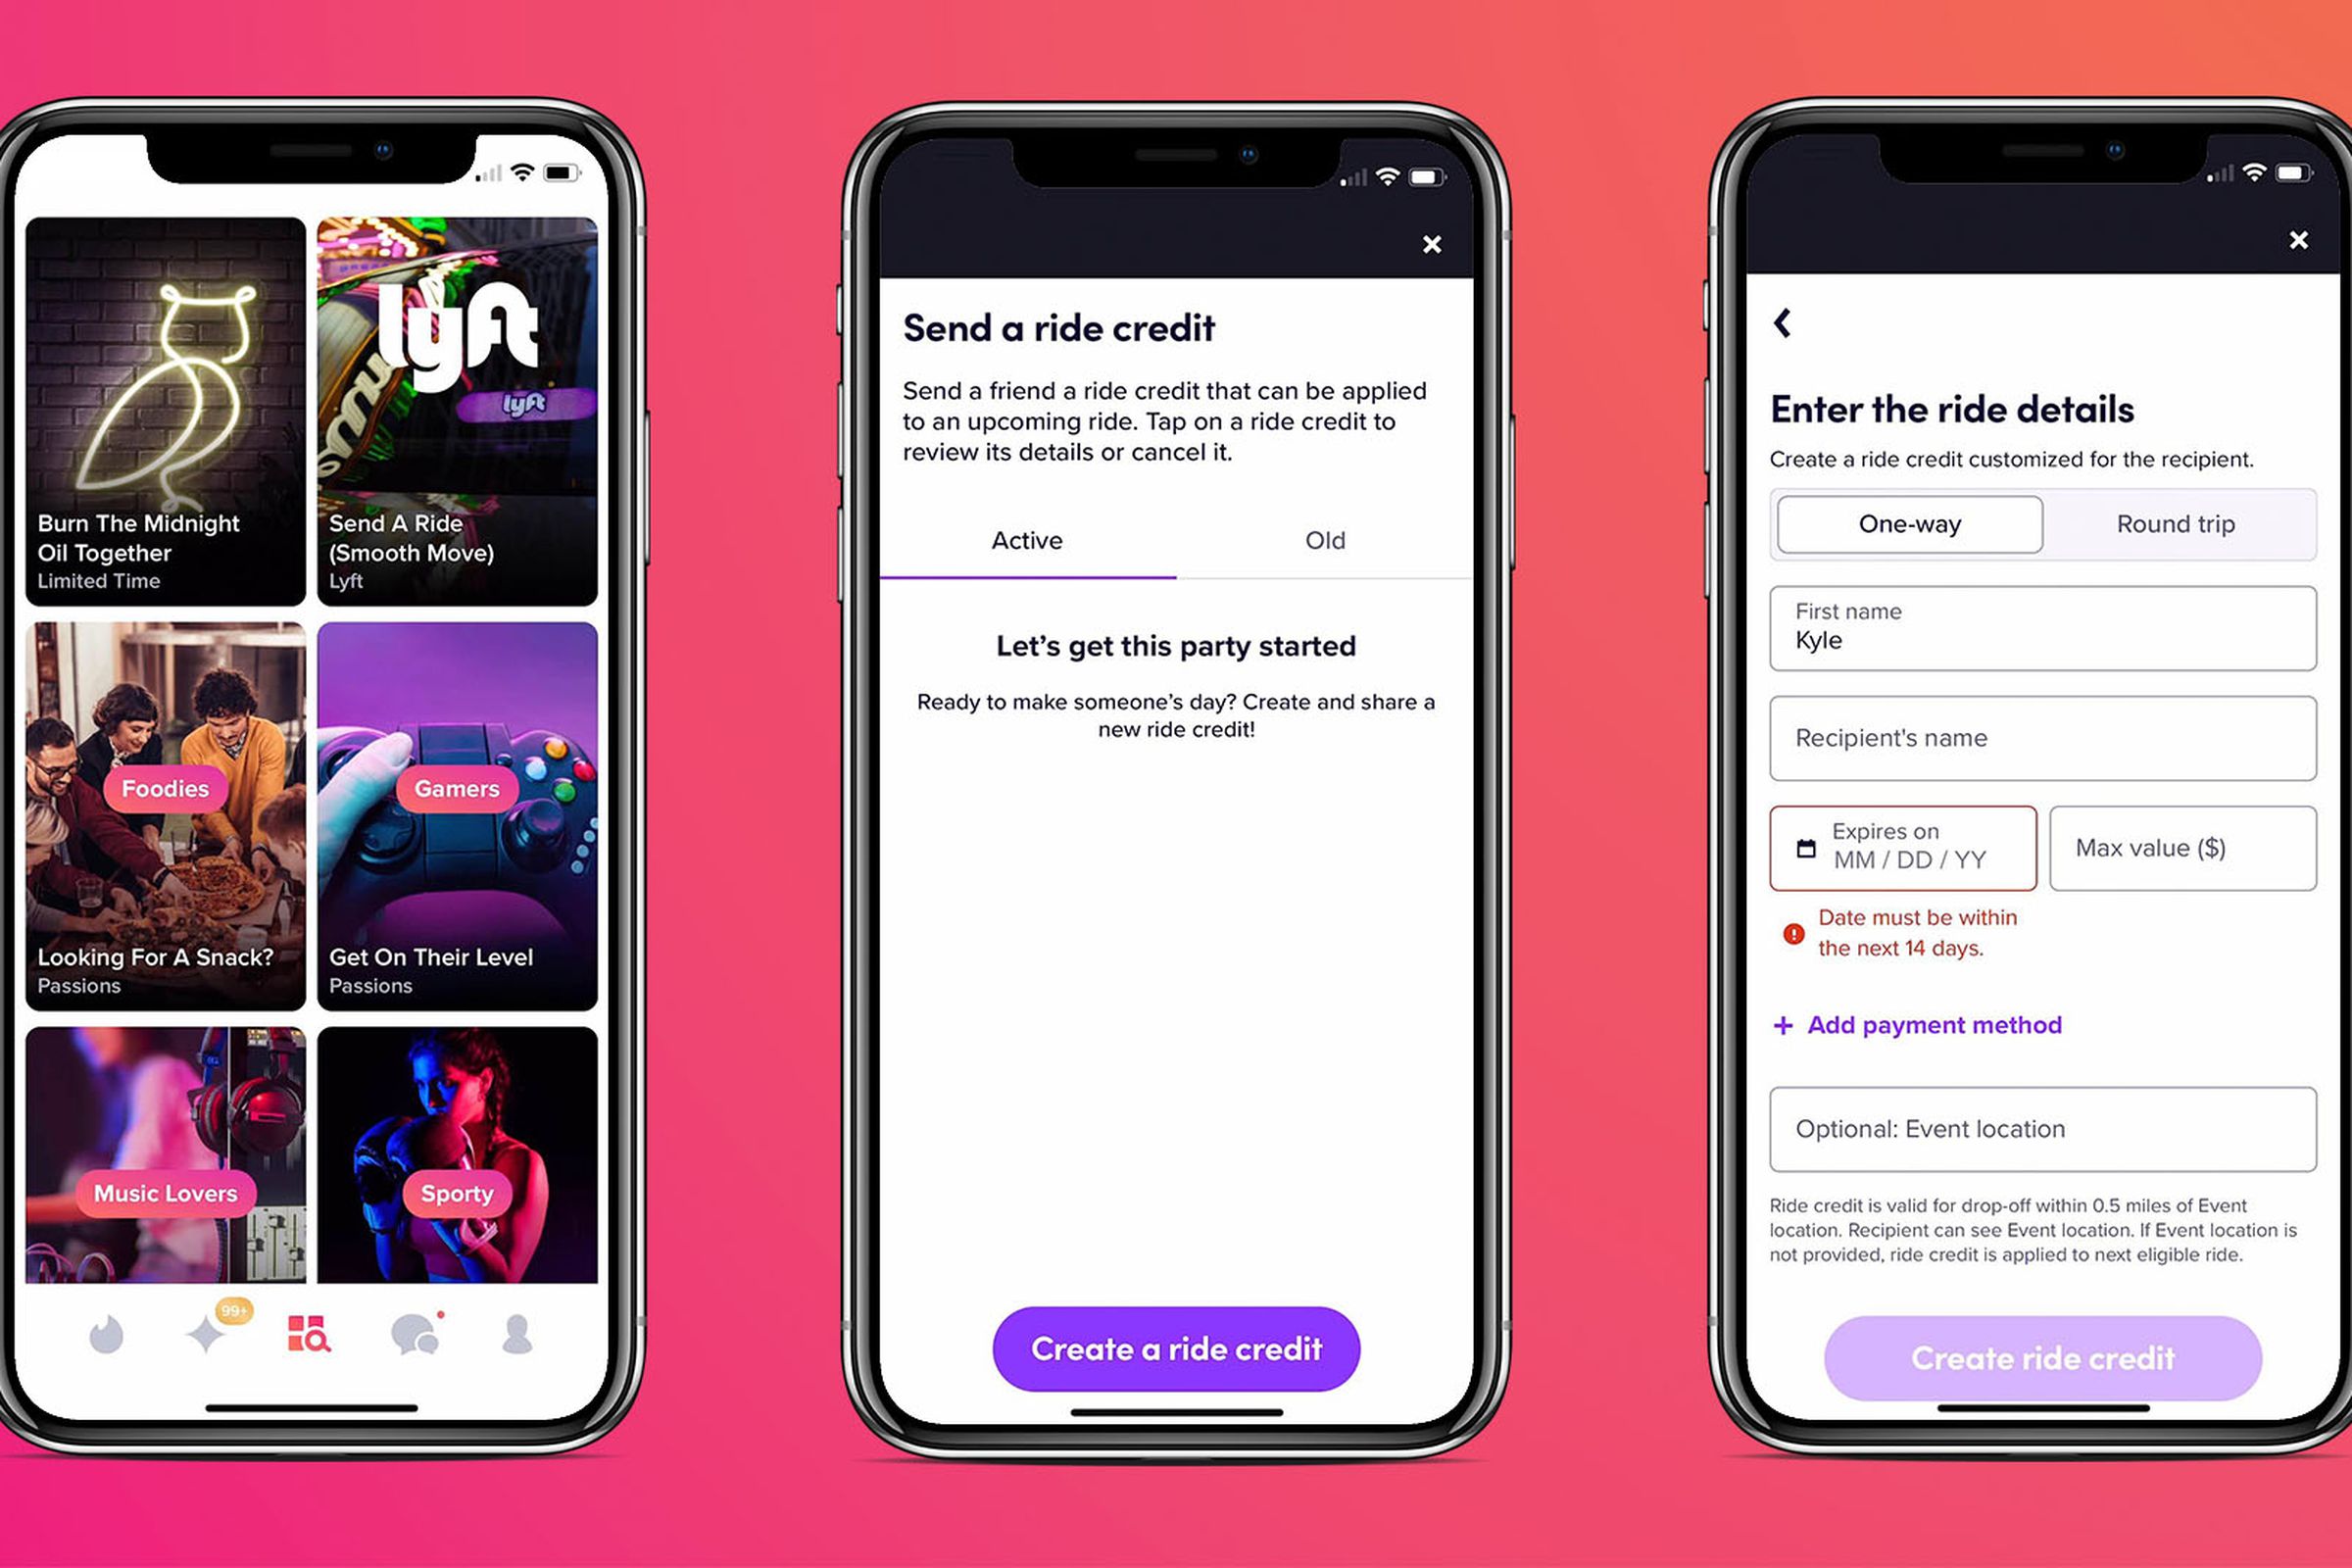 Lyft and Tinder have partnered to offer free rides